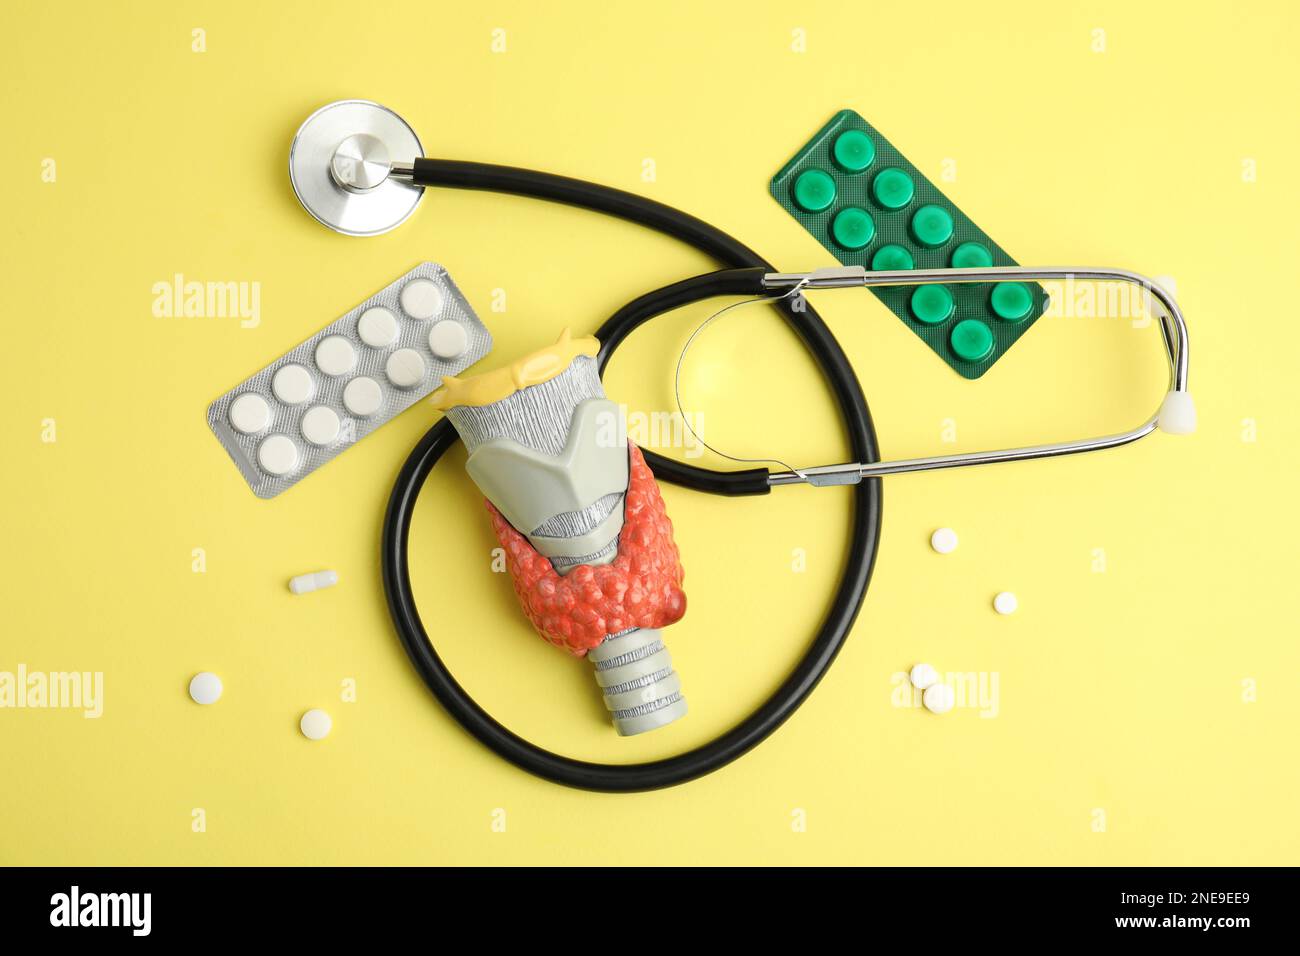 Plastic model of thyroid with tumor, pills and stethoscope on yellow background, flat lay Stock Photo